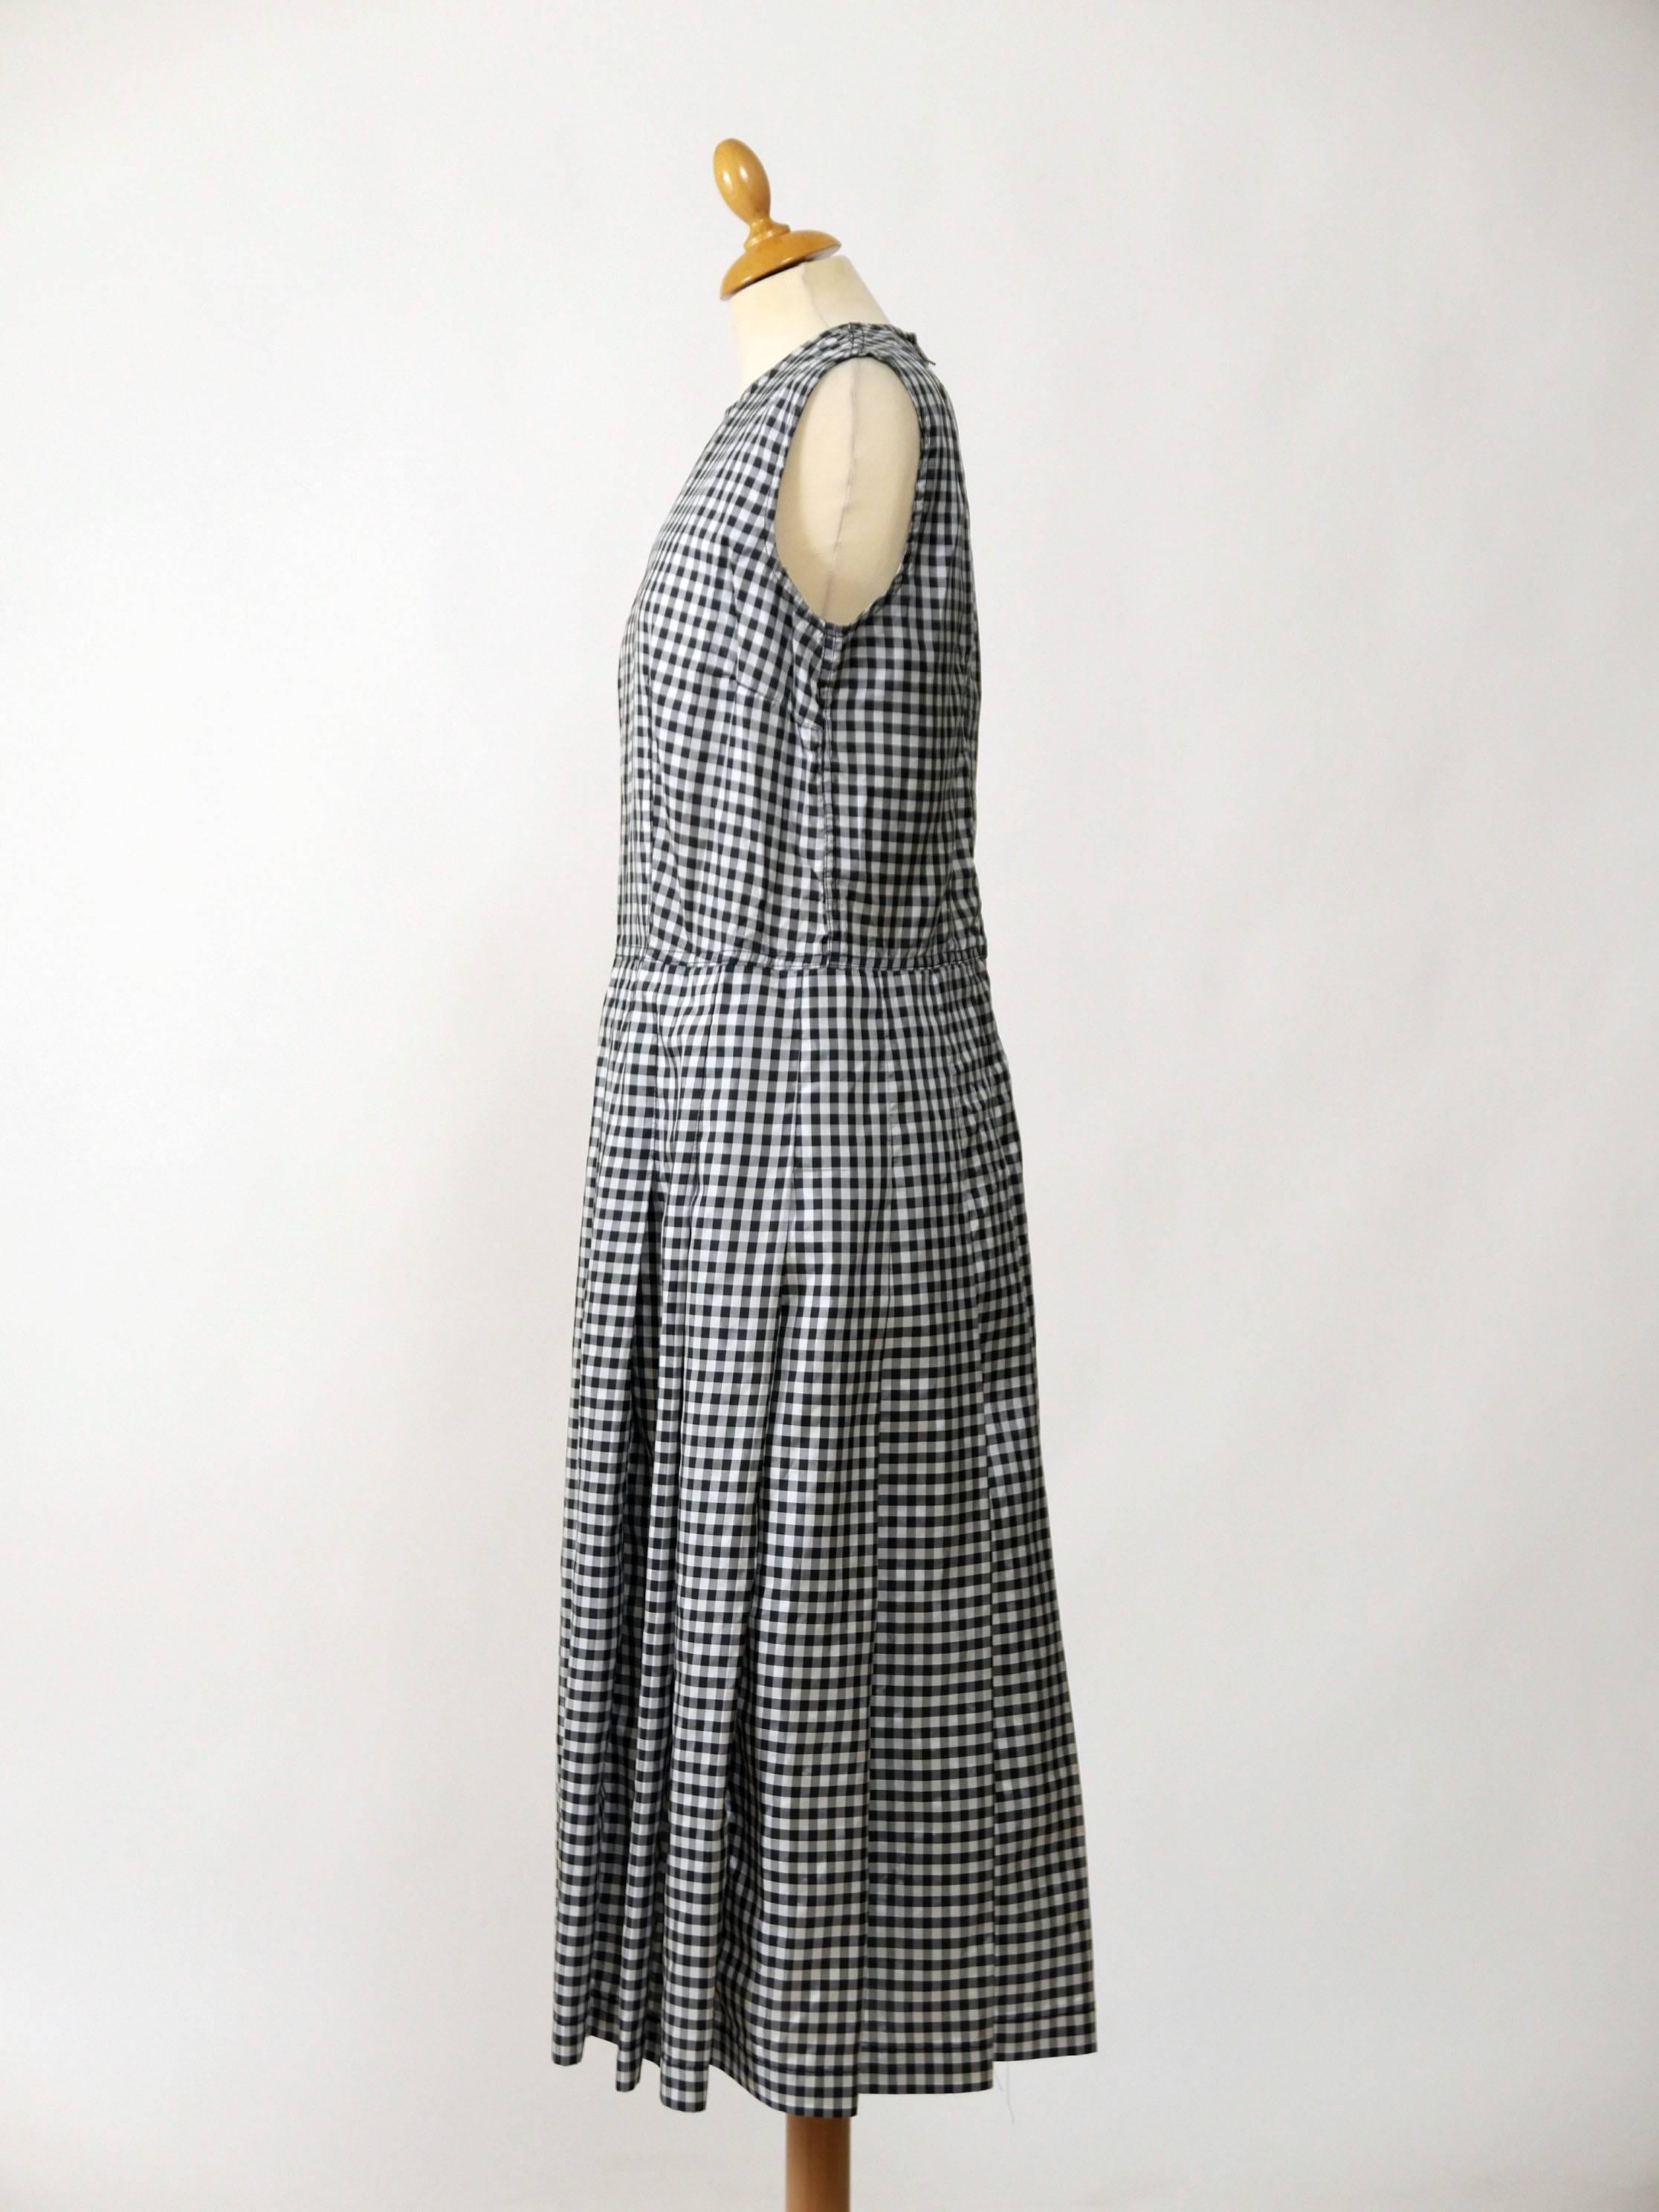 This lovely Comme Des Garçons dress is in black and white gingham print satin fabric.  It has back zip closure and pleateds skirt.

Very good condition

Label: Comme Des Garçons - Made in Japan
Fabric: polyester
Color: